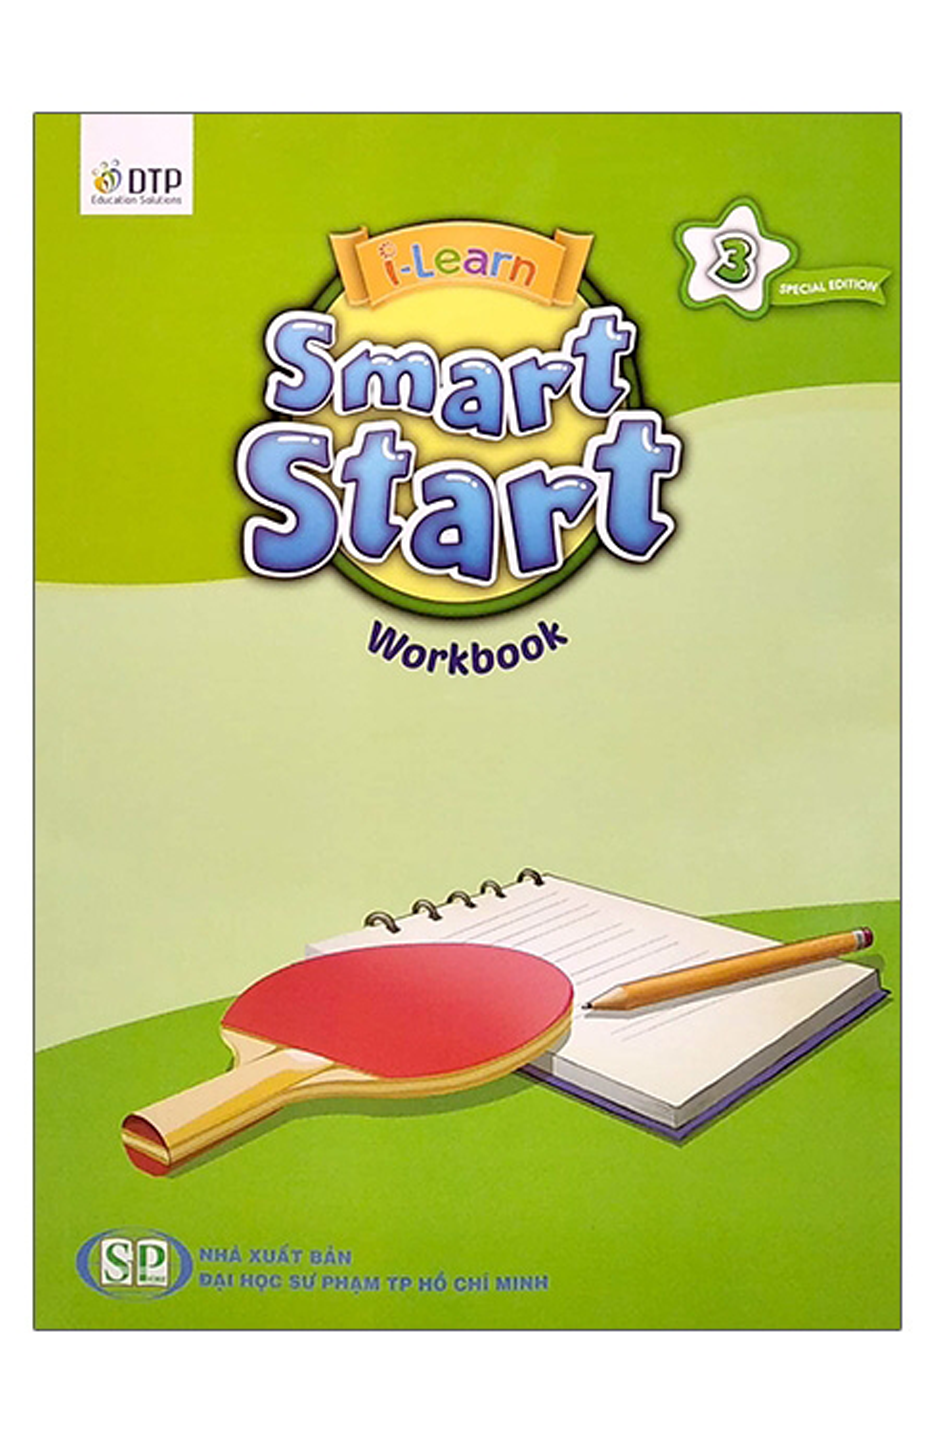 I-Learn Smart Start 3 -  Workbook Special Edition.